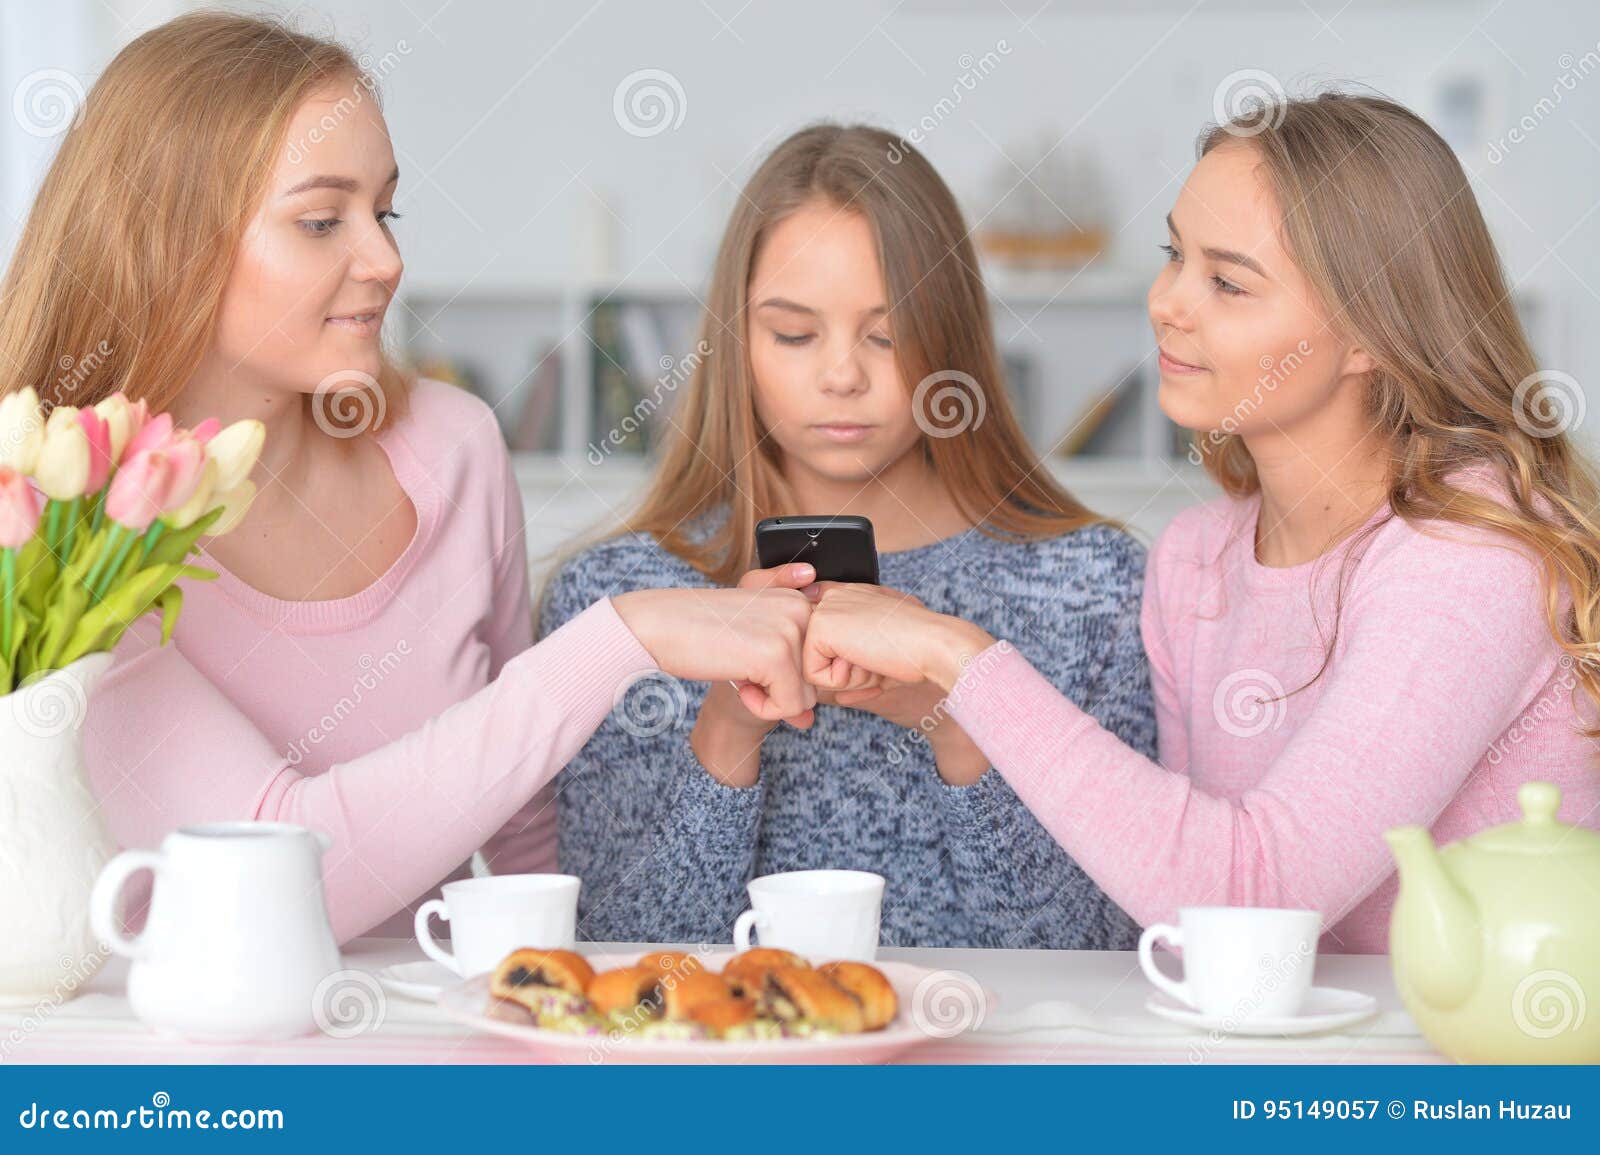 Group of Teenage Girls with Smartphone Stock Image - Image of research ...